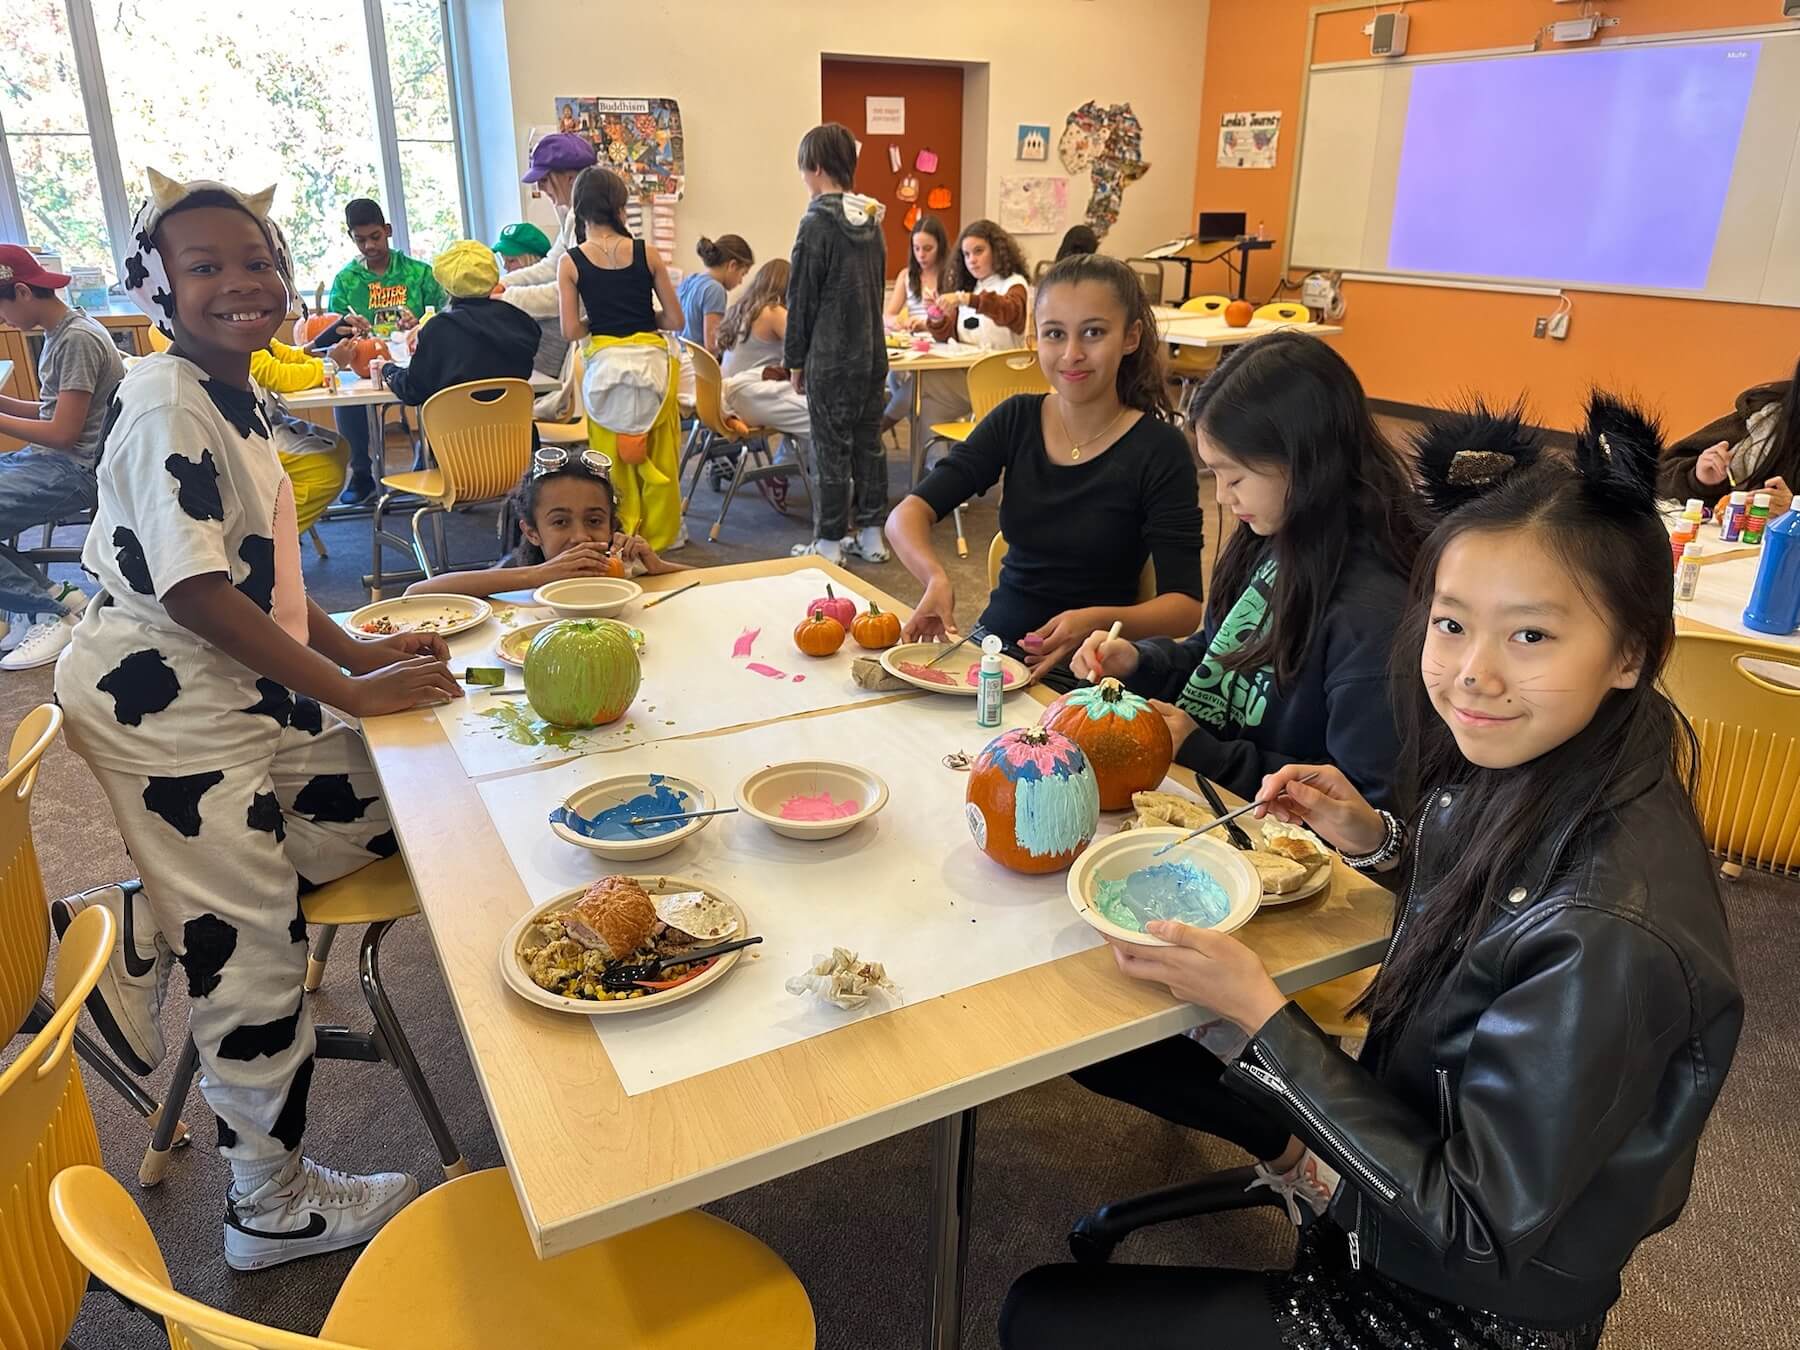 Ethical Culture Fieldston School_Feel Good Photos_Fieldston Middle students share a meal during Halloween celebration